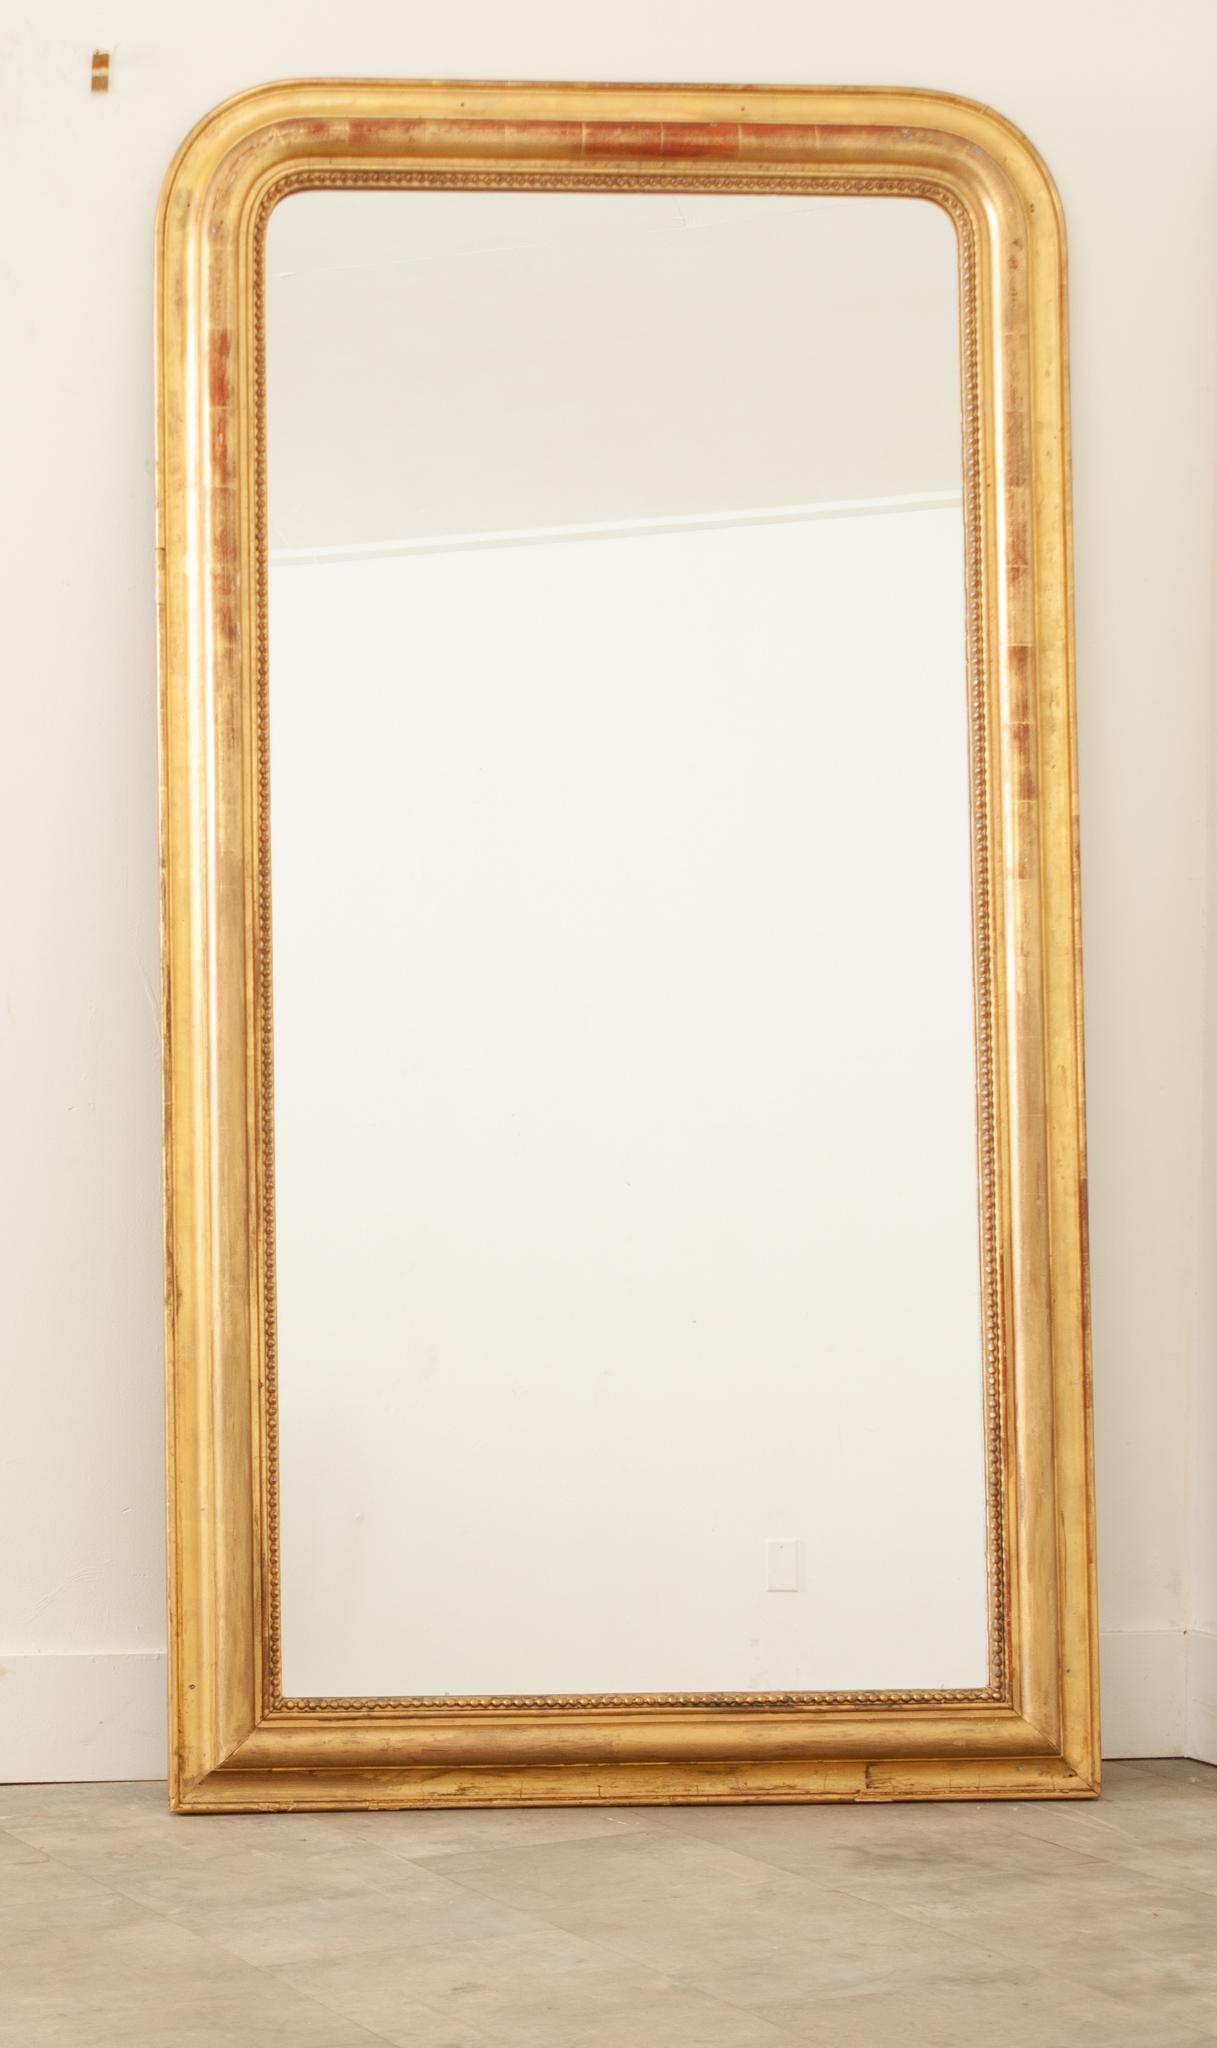 A large Louis Phillipe style floor mirror hand-crafted in France in the 19th century. This tall, elegant mirror with classic Louis Philippe style embellishments stands at over five feet with quite a commanding presence. The hand-carved frame has a